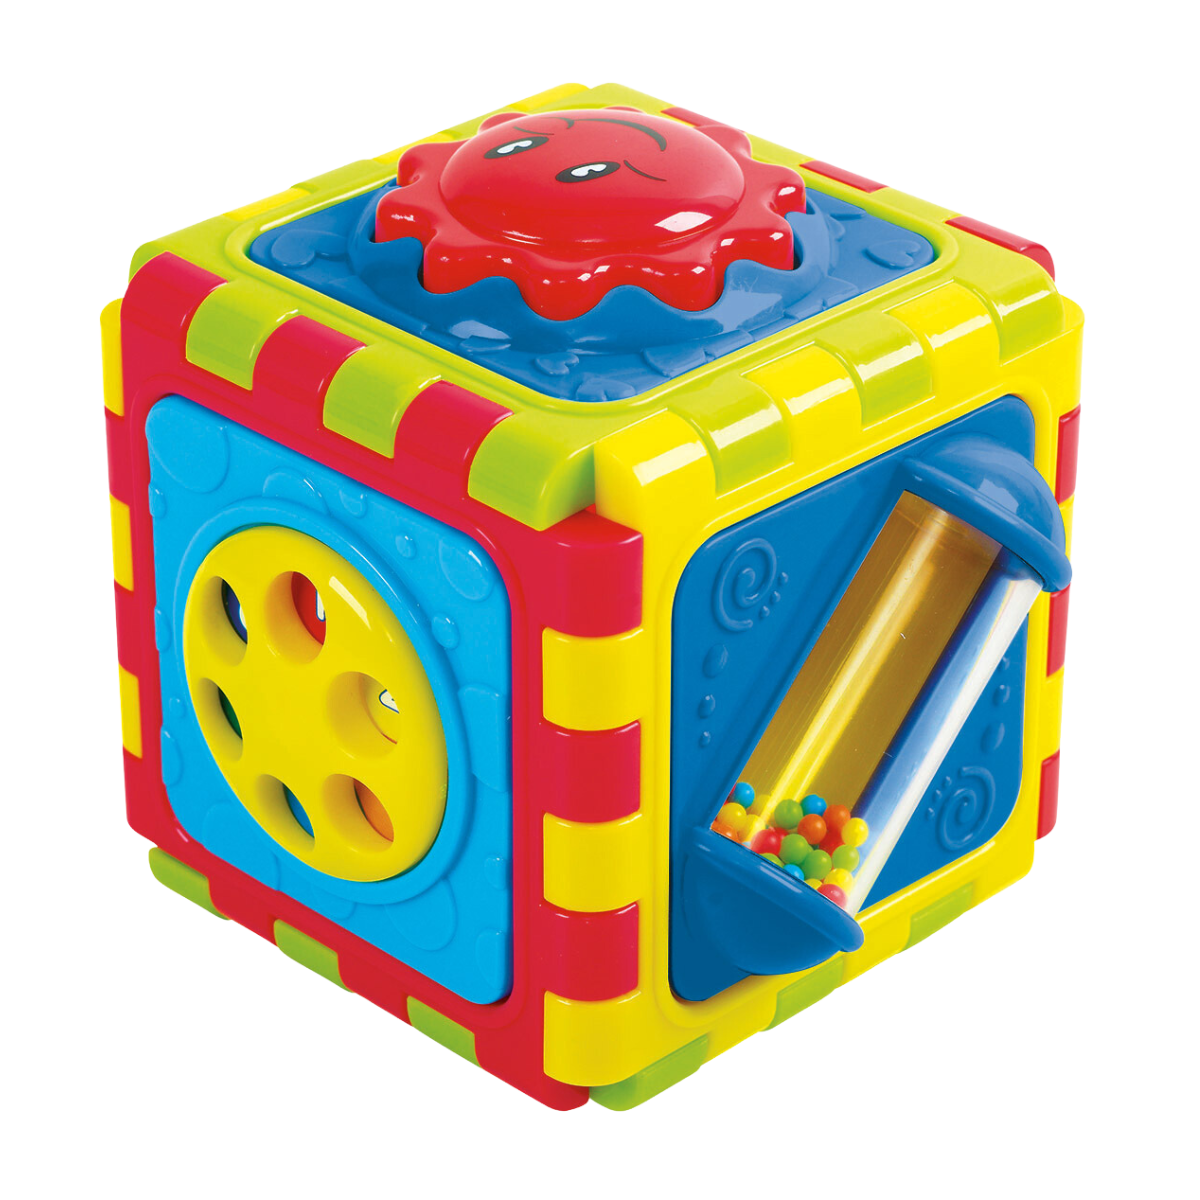 6 in 1 Activity Cube